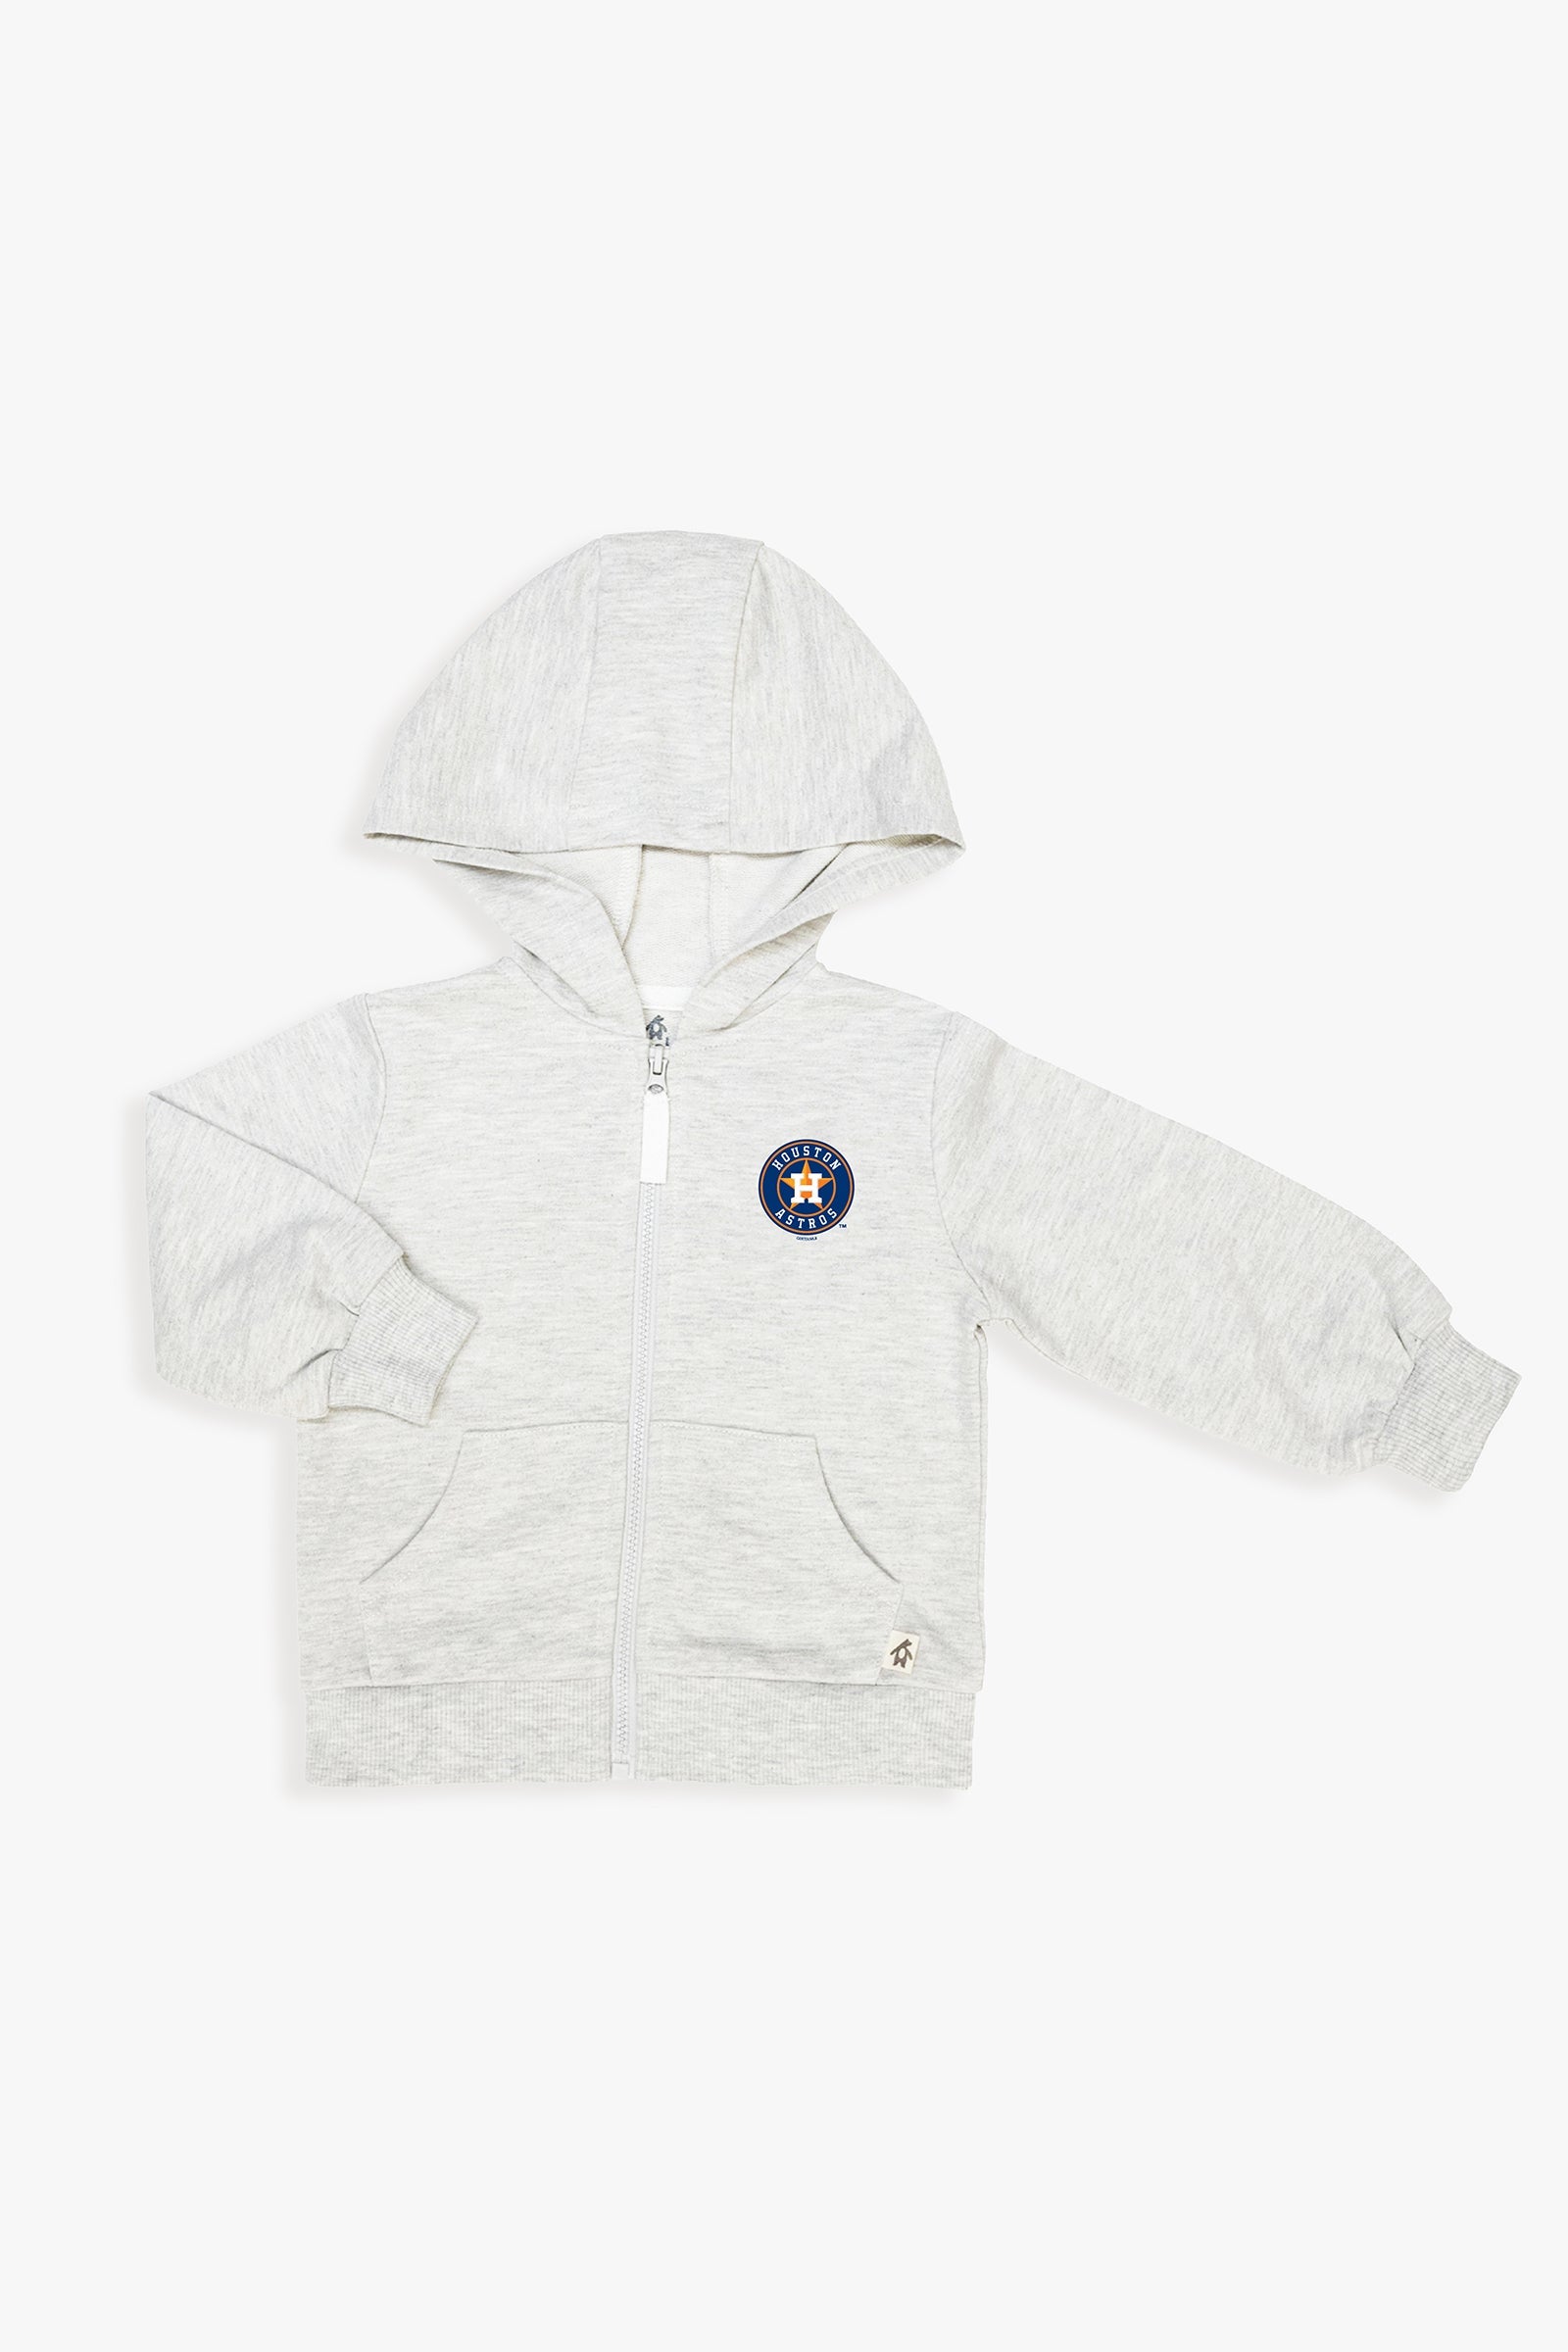 Gertex MLB Unisex Baby French Terry Cotton Zip-Up Hoodie